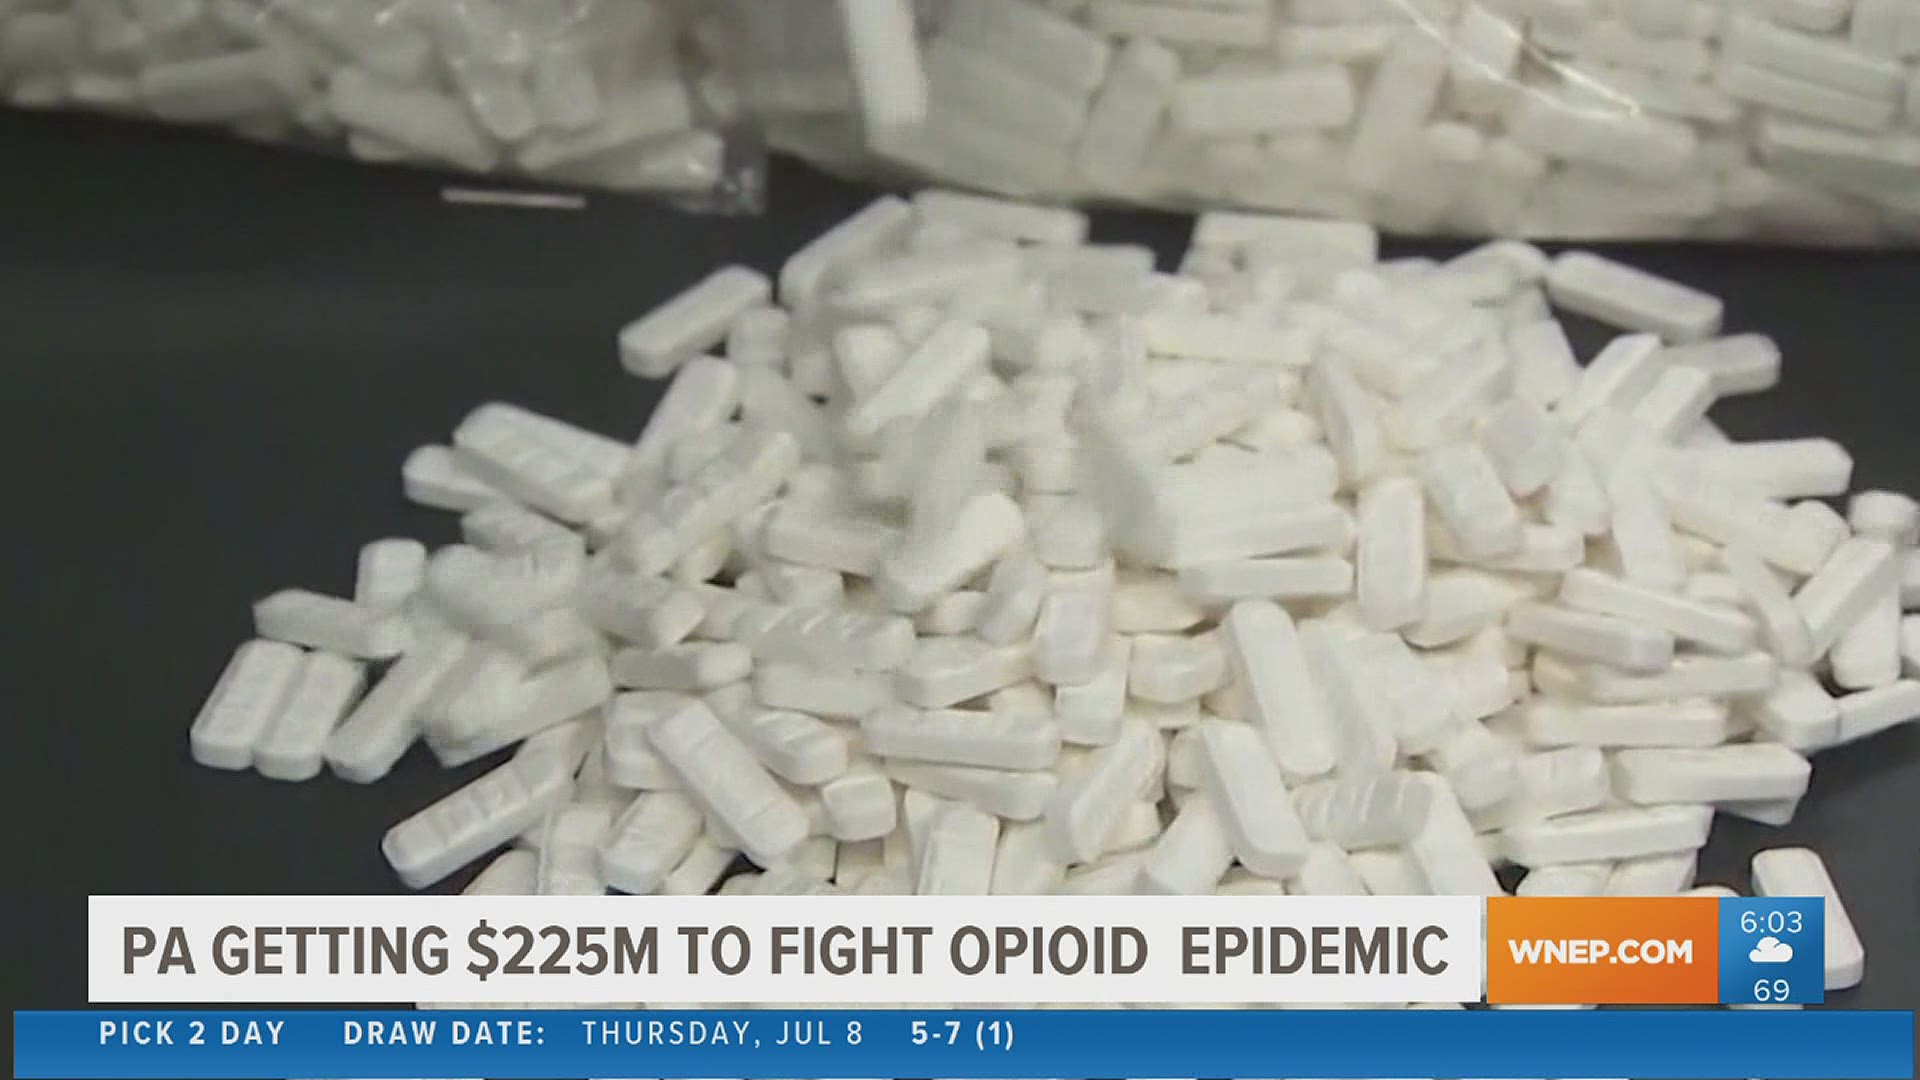 Pennsylvania is set to get more than $200 million to fight the opioid epidemic.